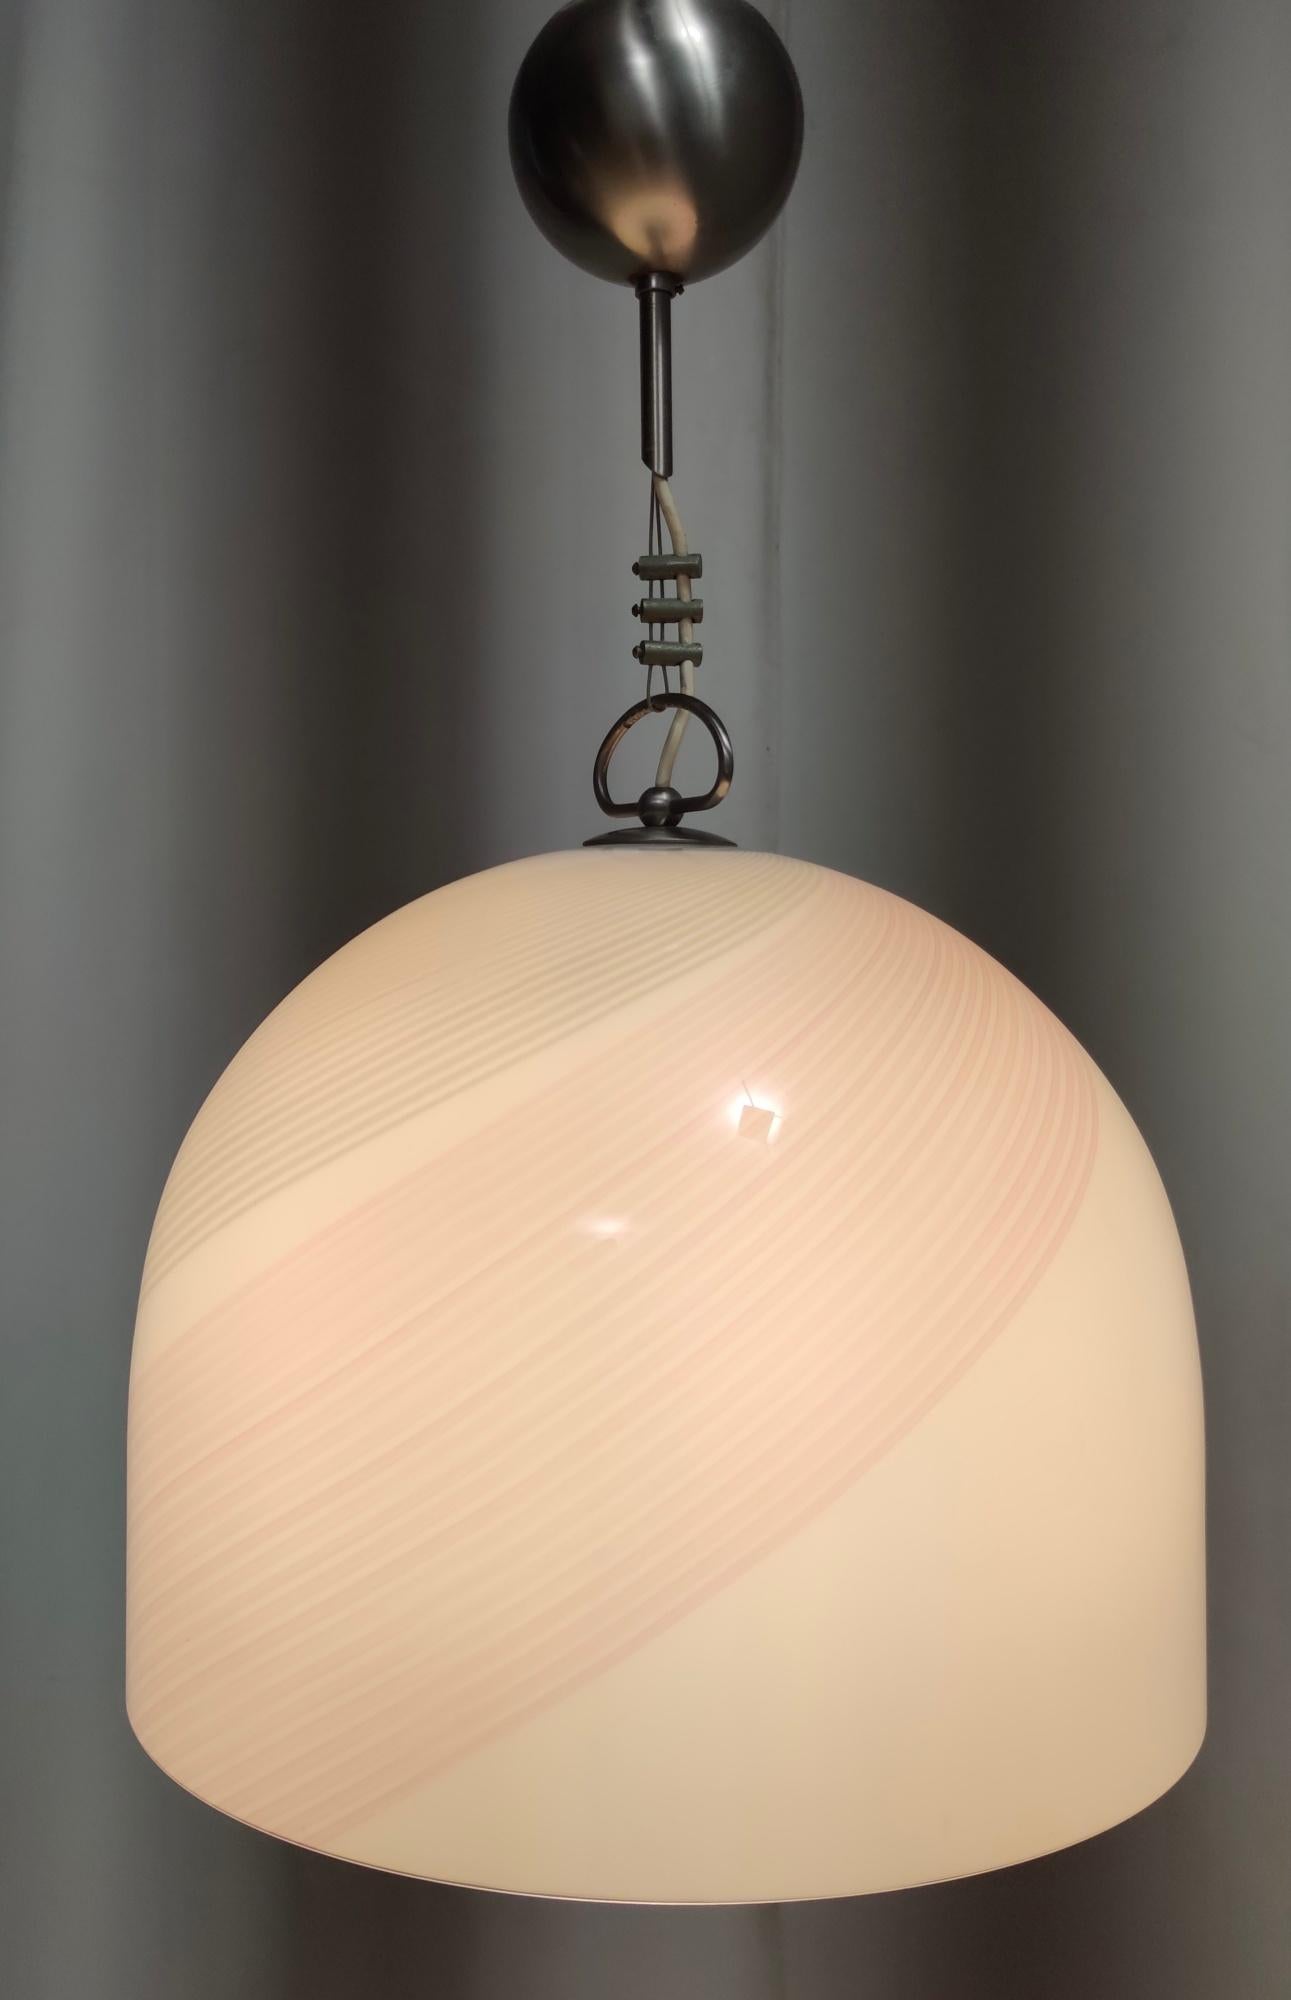 Made in Italy, 1970s - 1980s. 
It features a bell-shaped white Murano glass lampshade with pink and grey lines. 
This pendant is a vintage piece, therefore it might show slight traces of use, but it can be considered as in excellent original